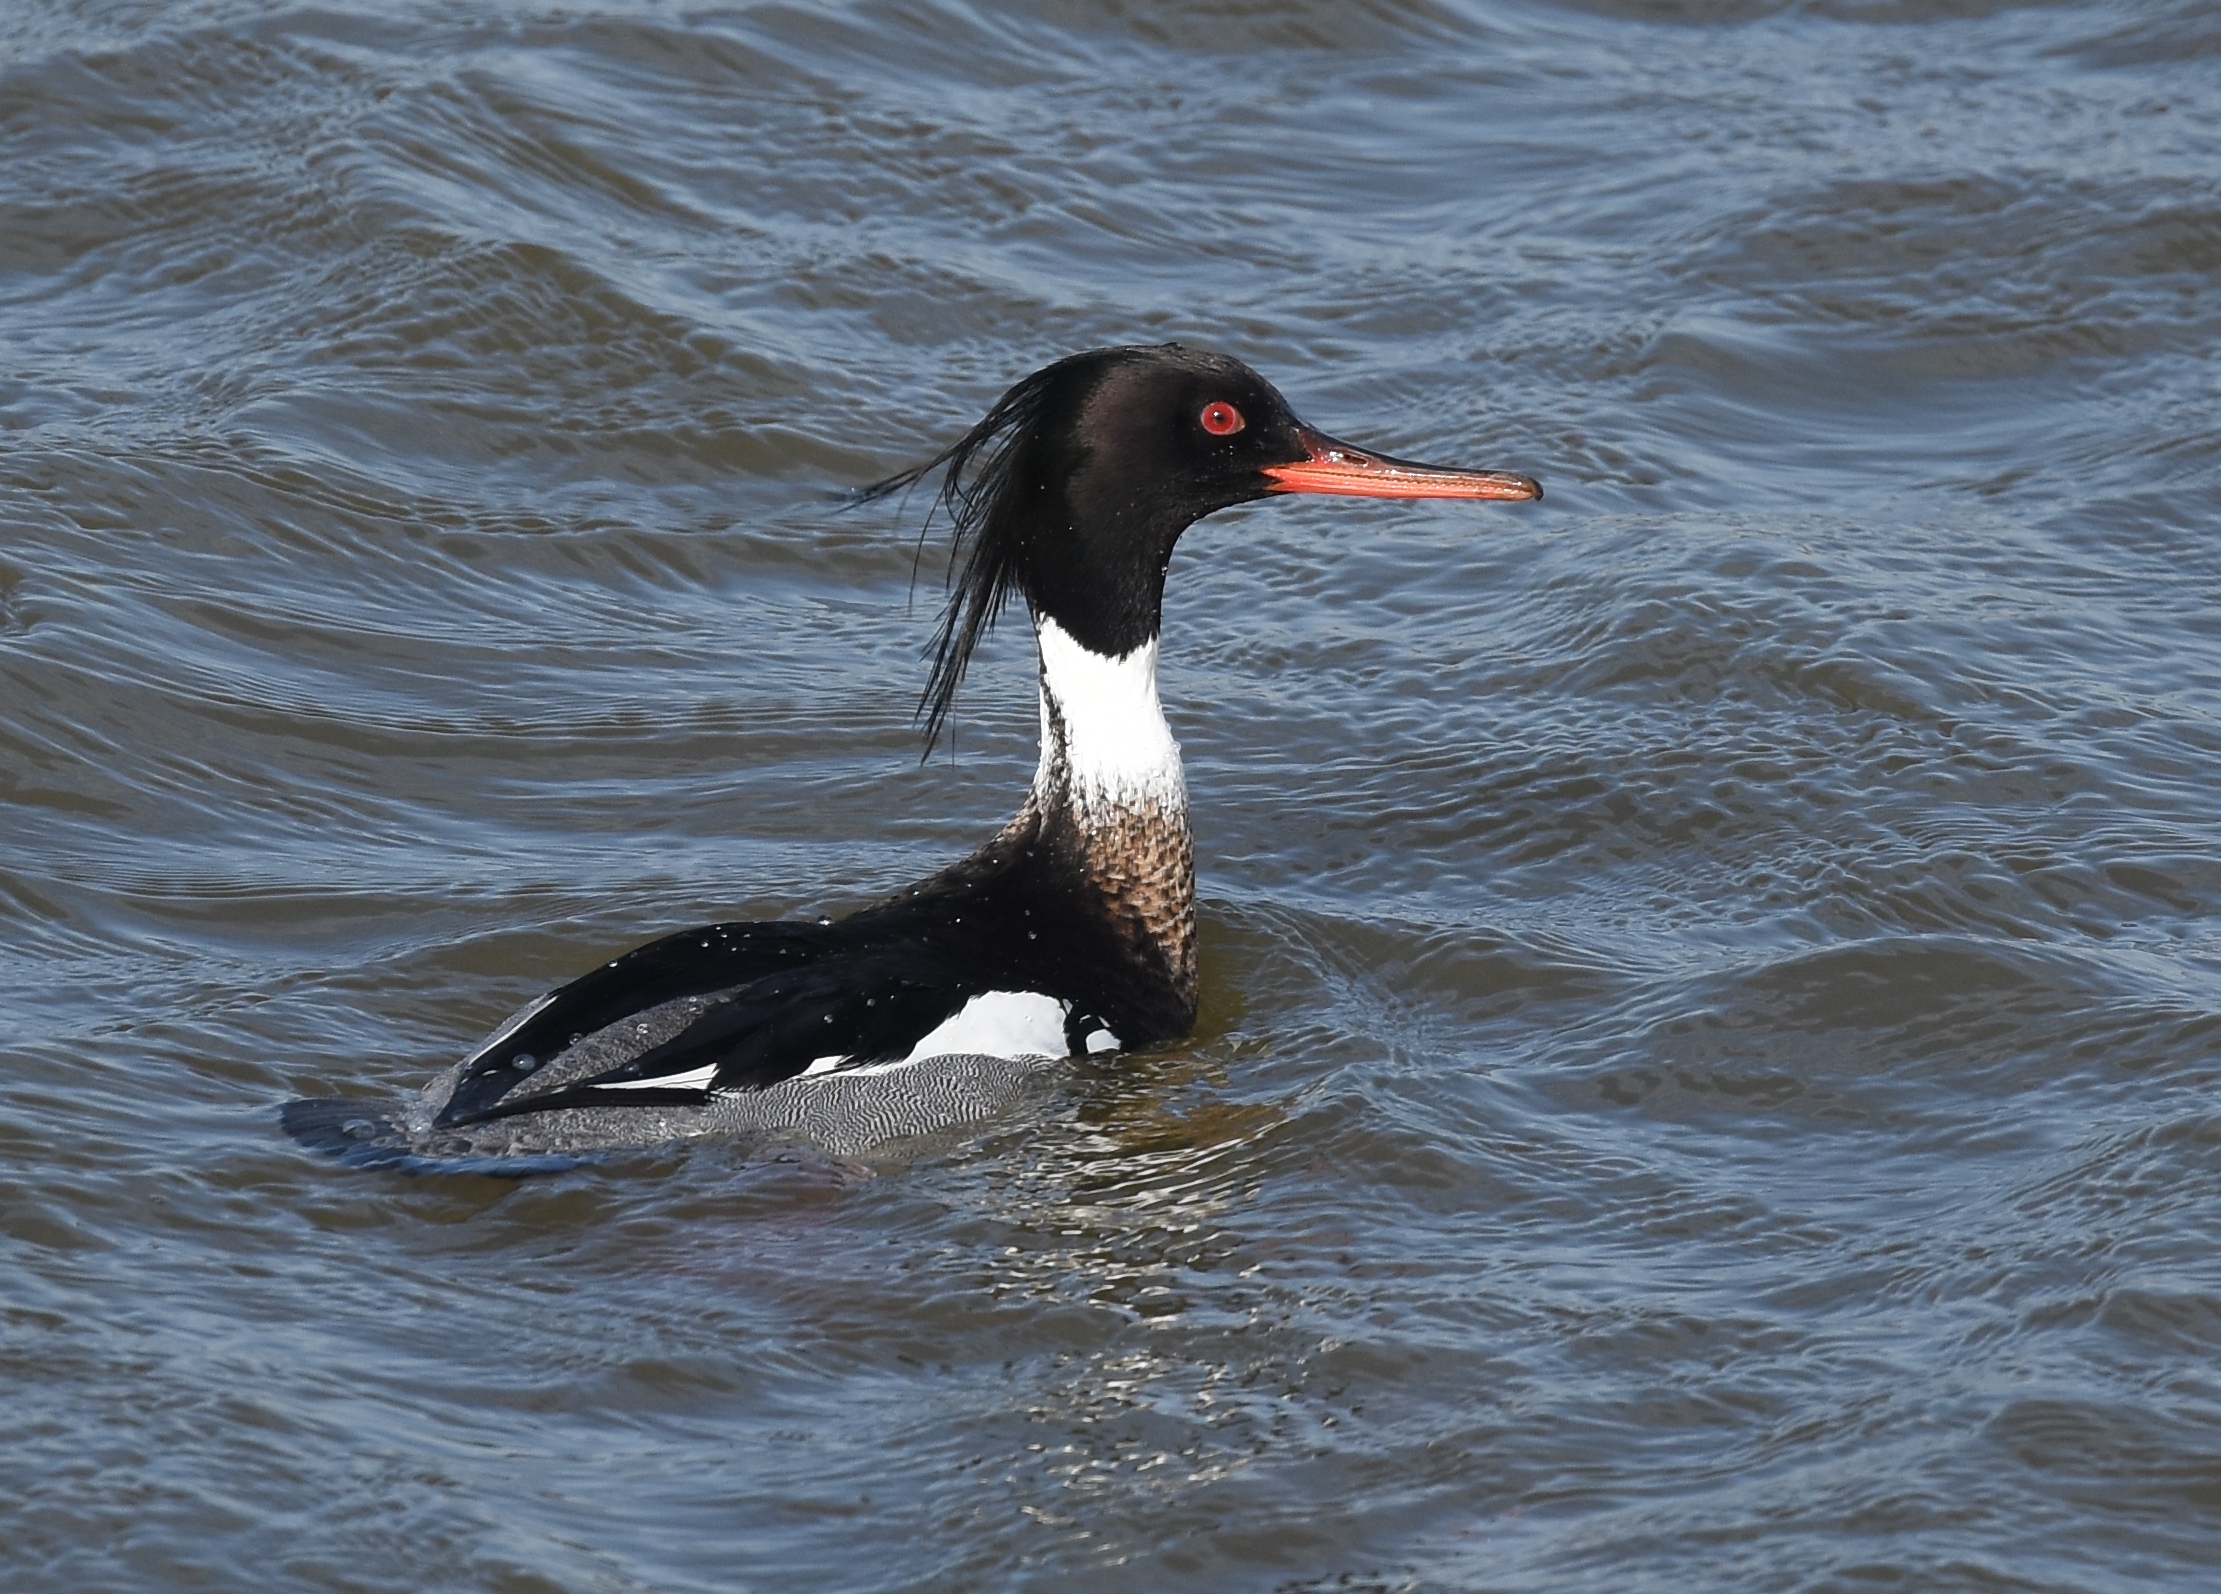 A male Red-breasted Merganser, up from a dive. Photo: Andy Reago & Chrissy McClarren/CC BY 2.0